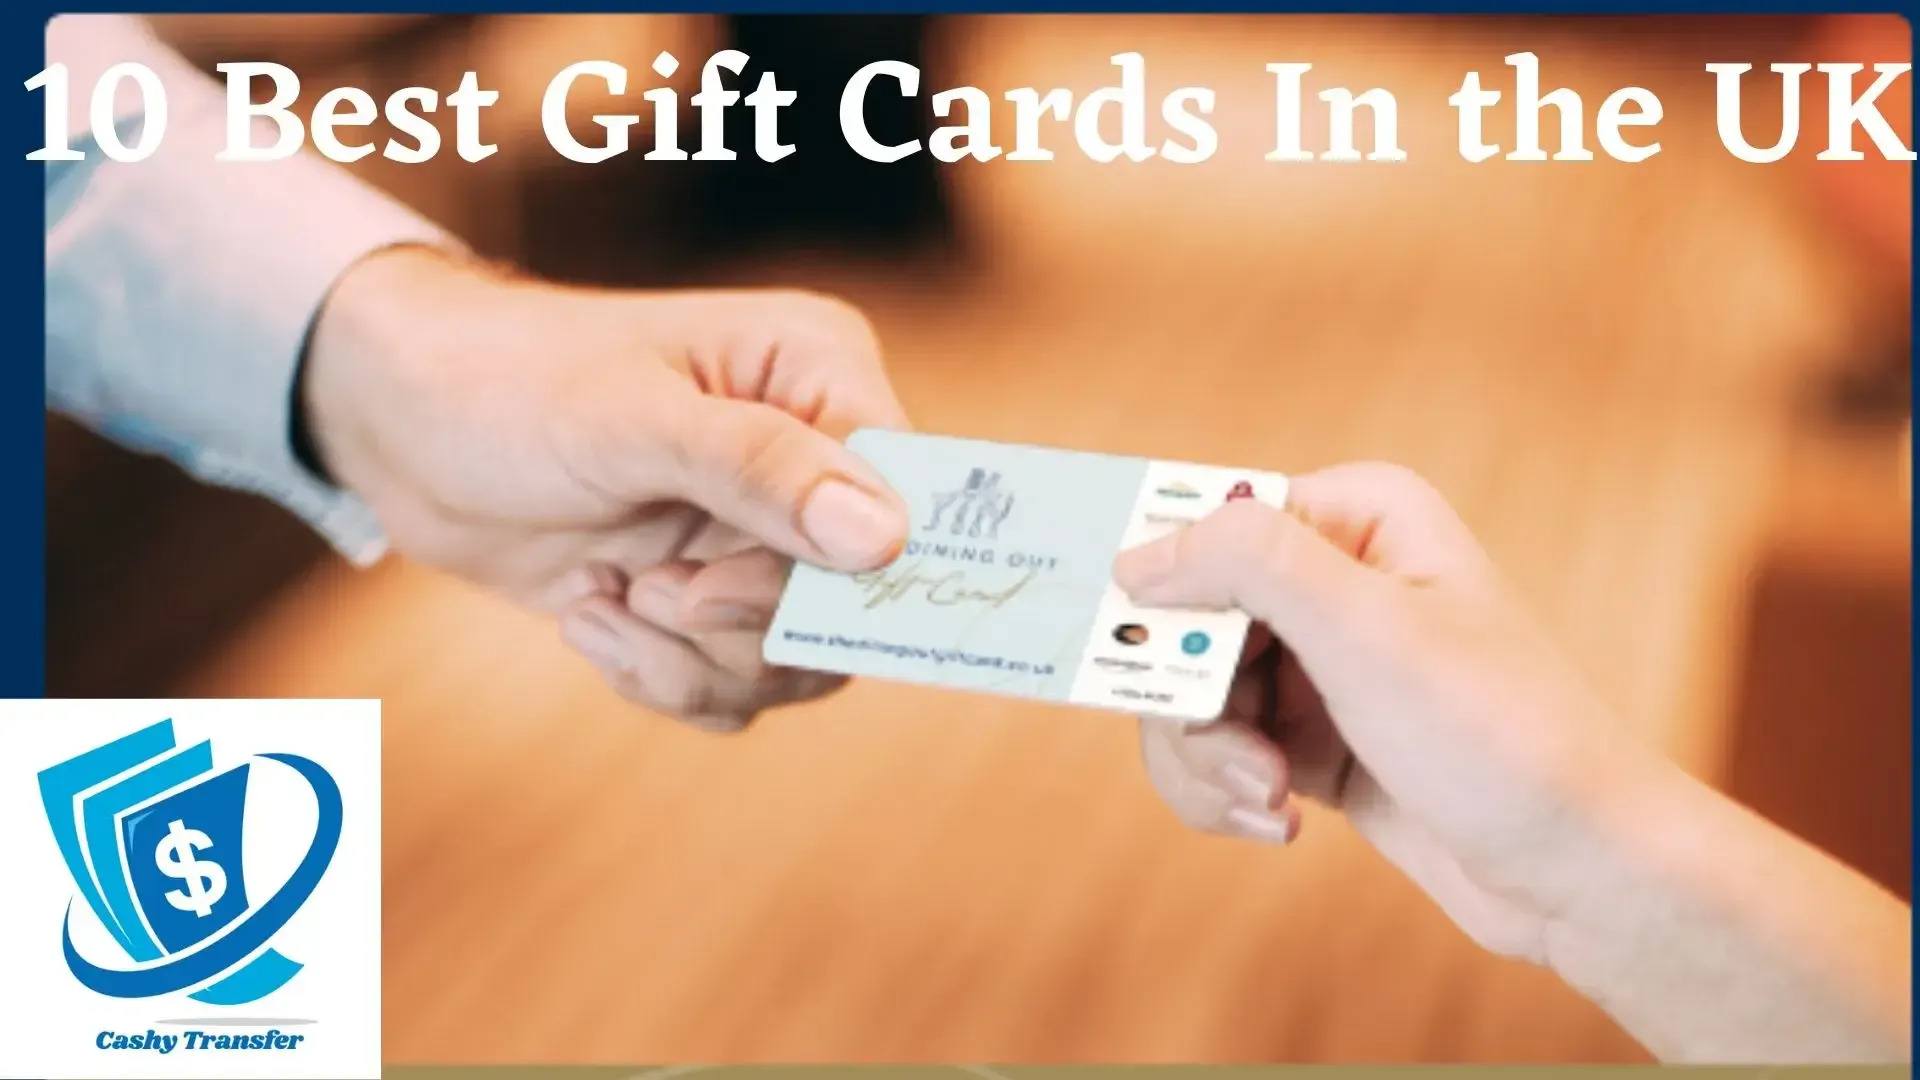 Best Gift Cards In the UK